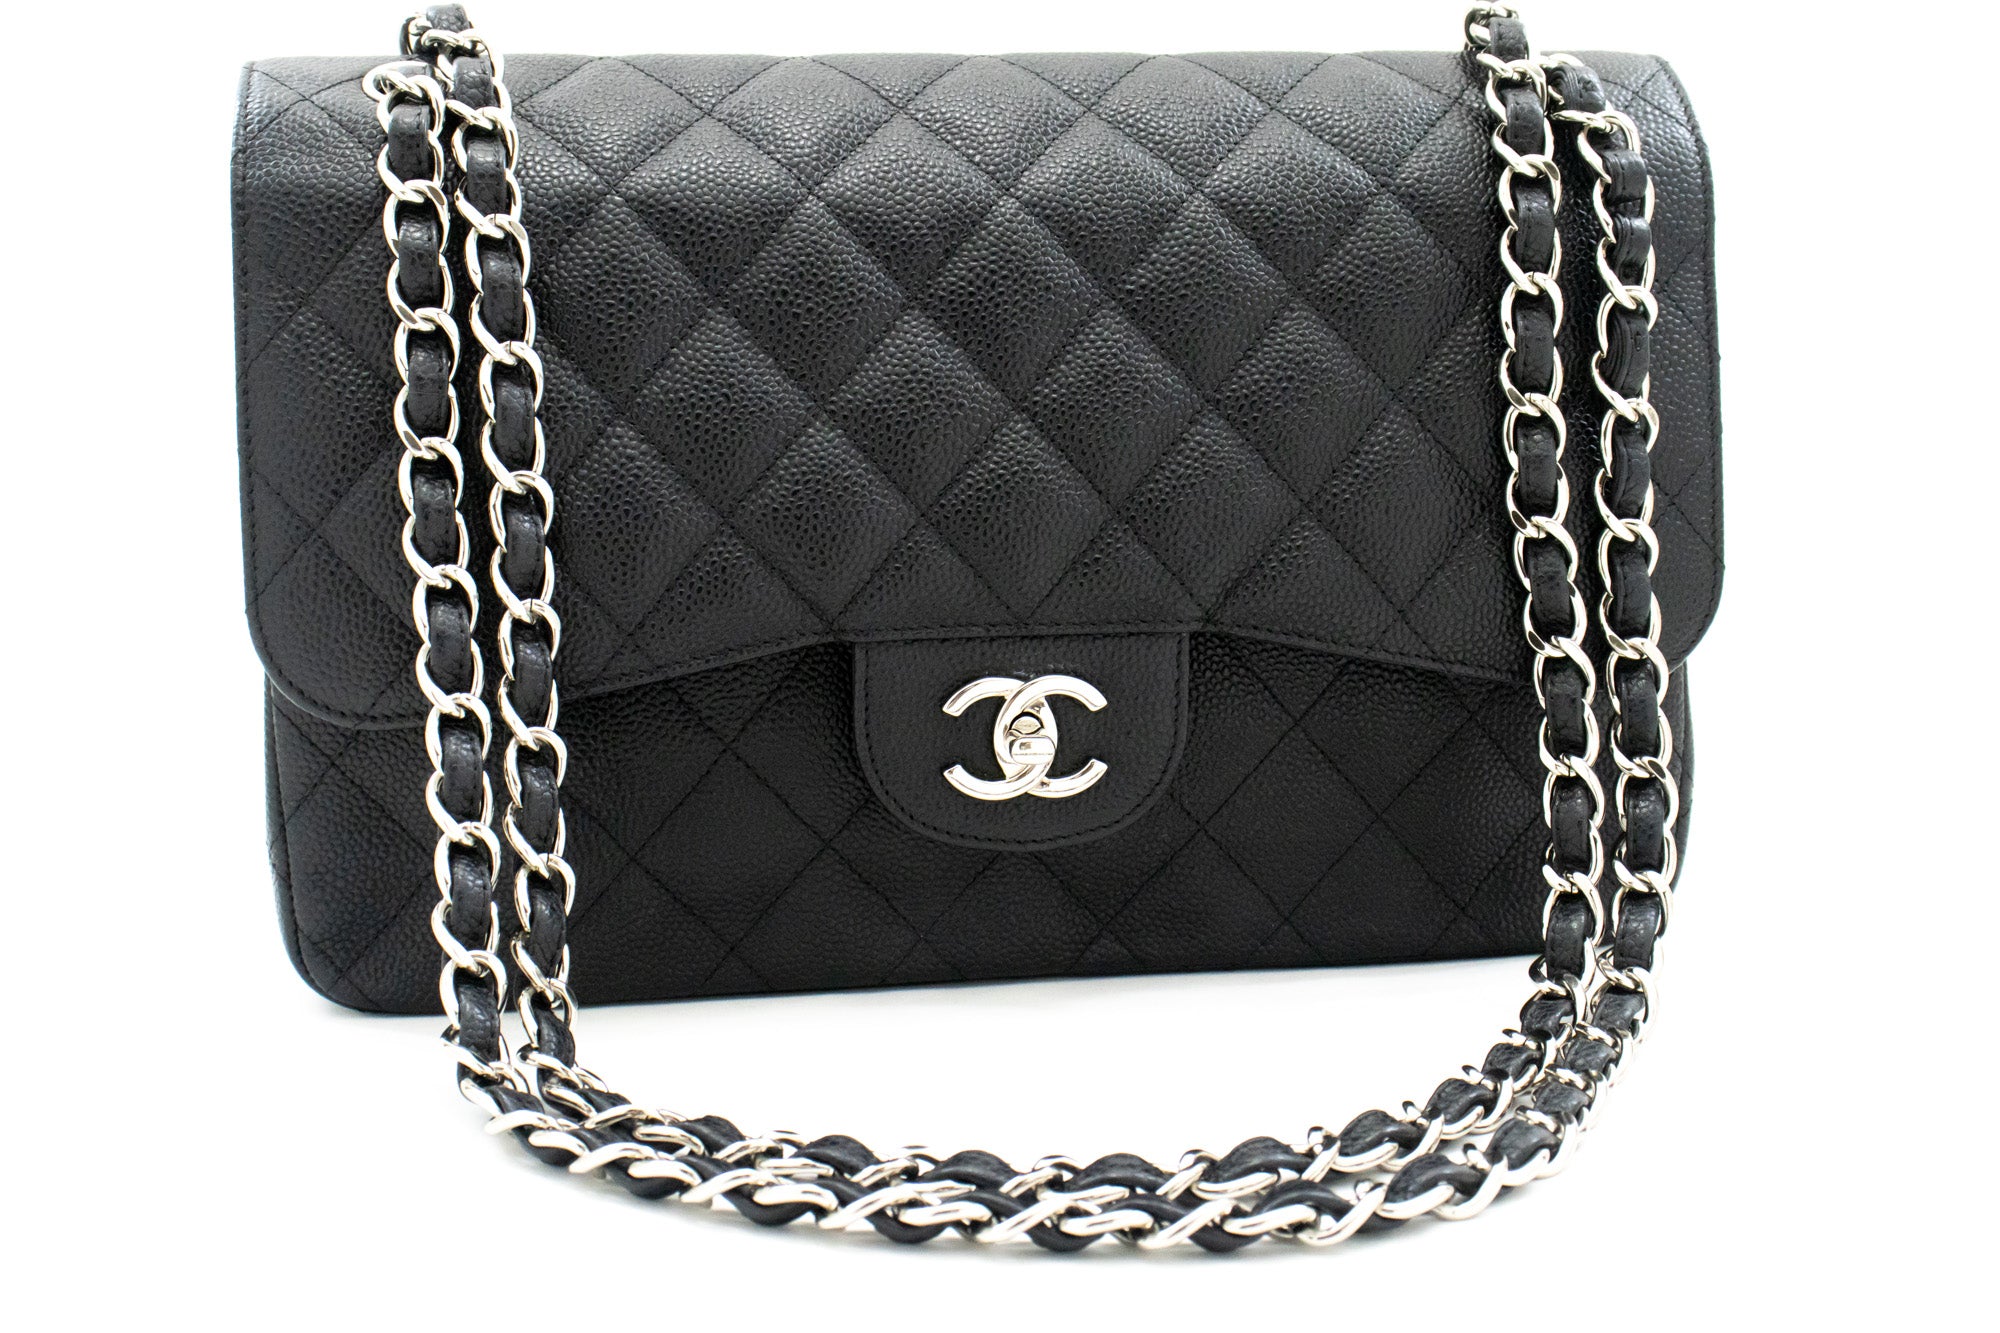 Pre-owned Chanel Black Quilted Leather Jumbo Classic Single Flap Bag